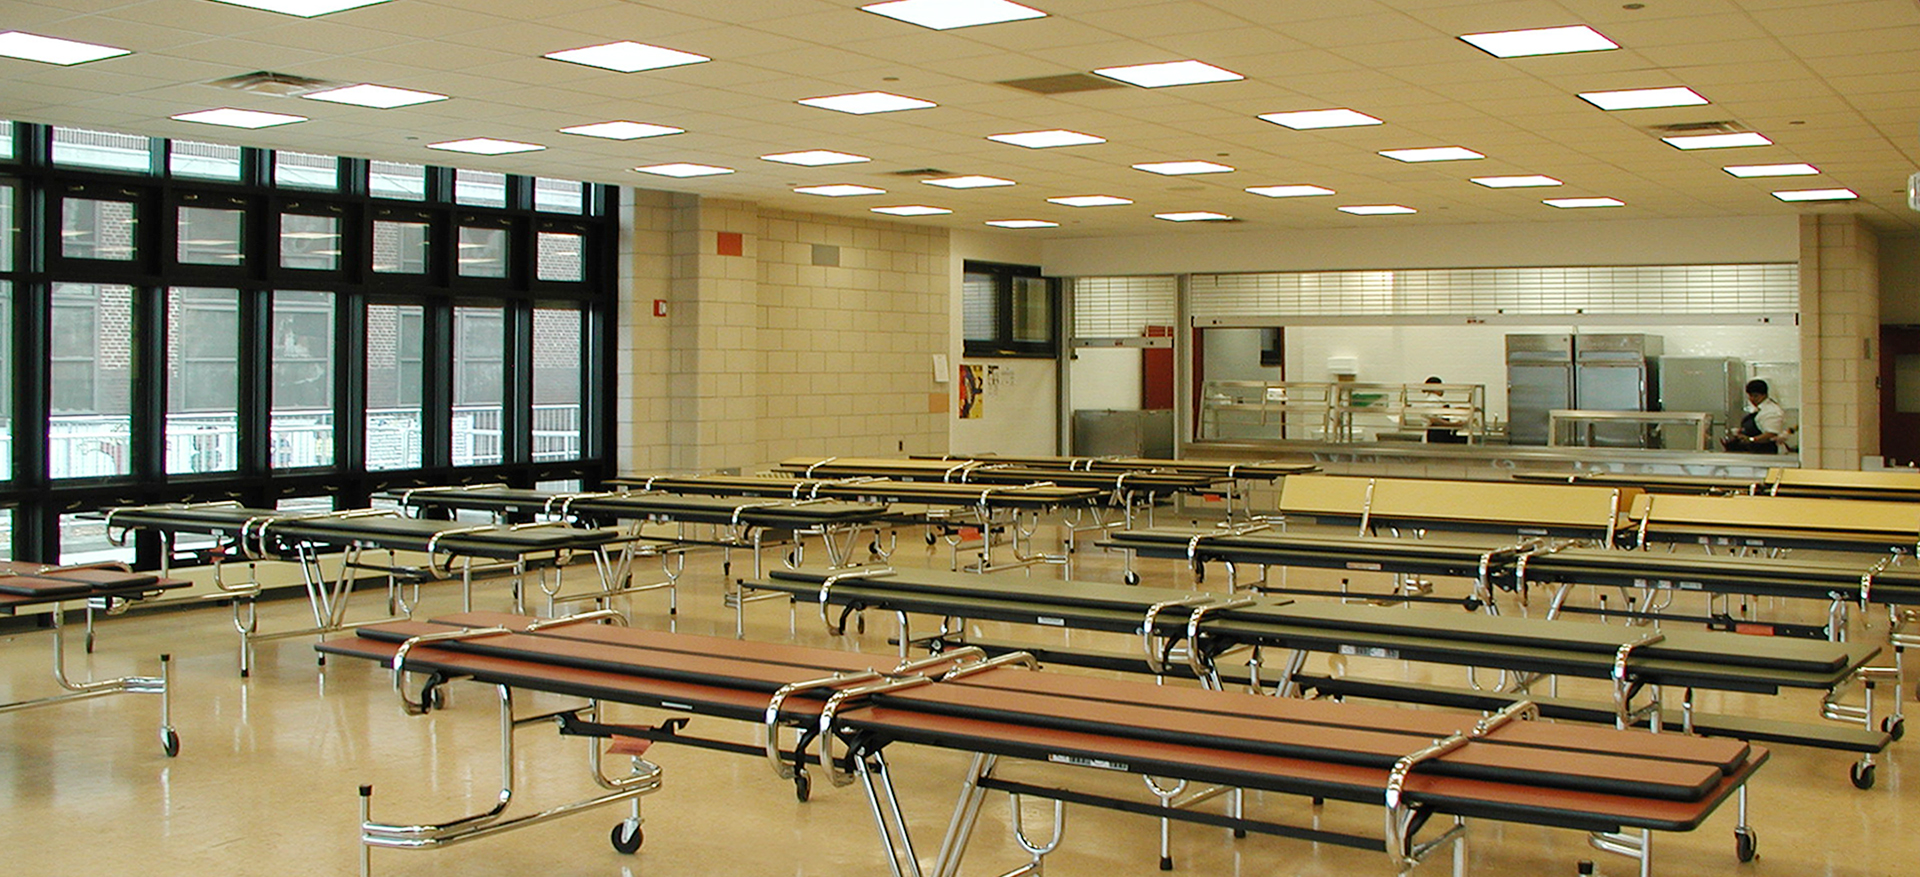 PS 124Q 2-CafeteriaHOR.jpg